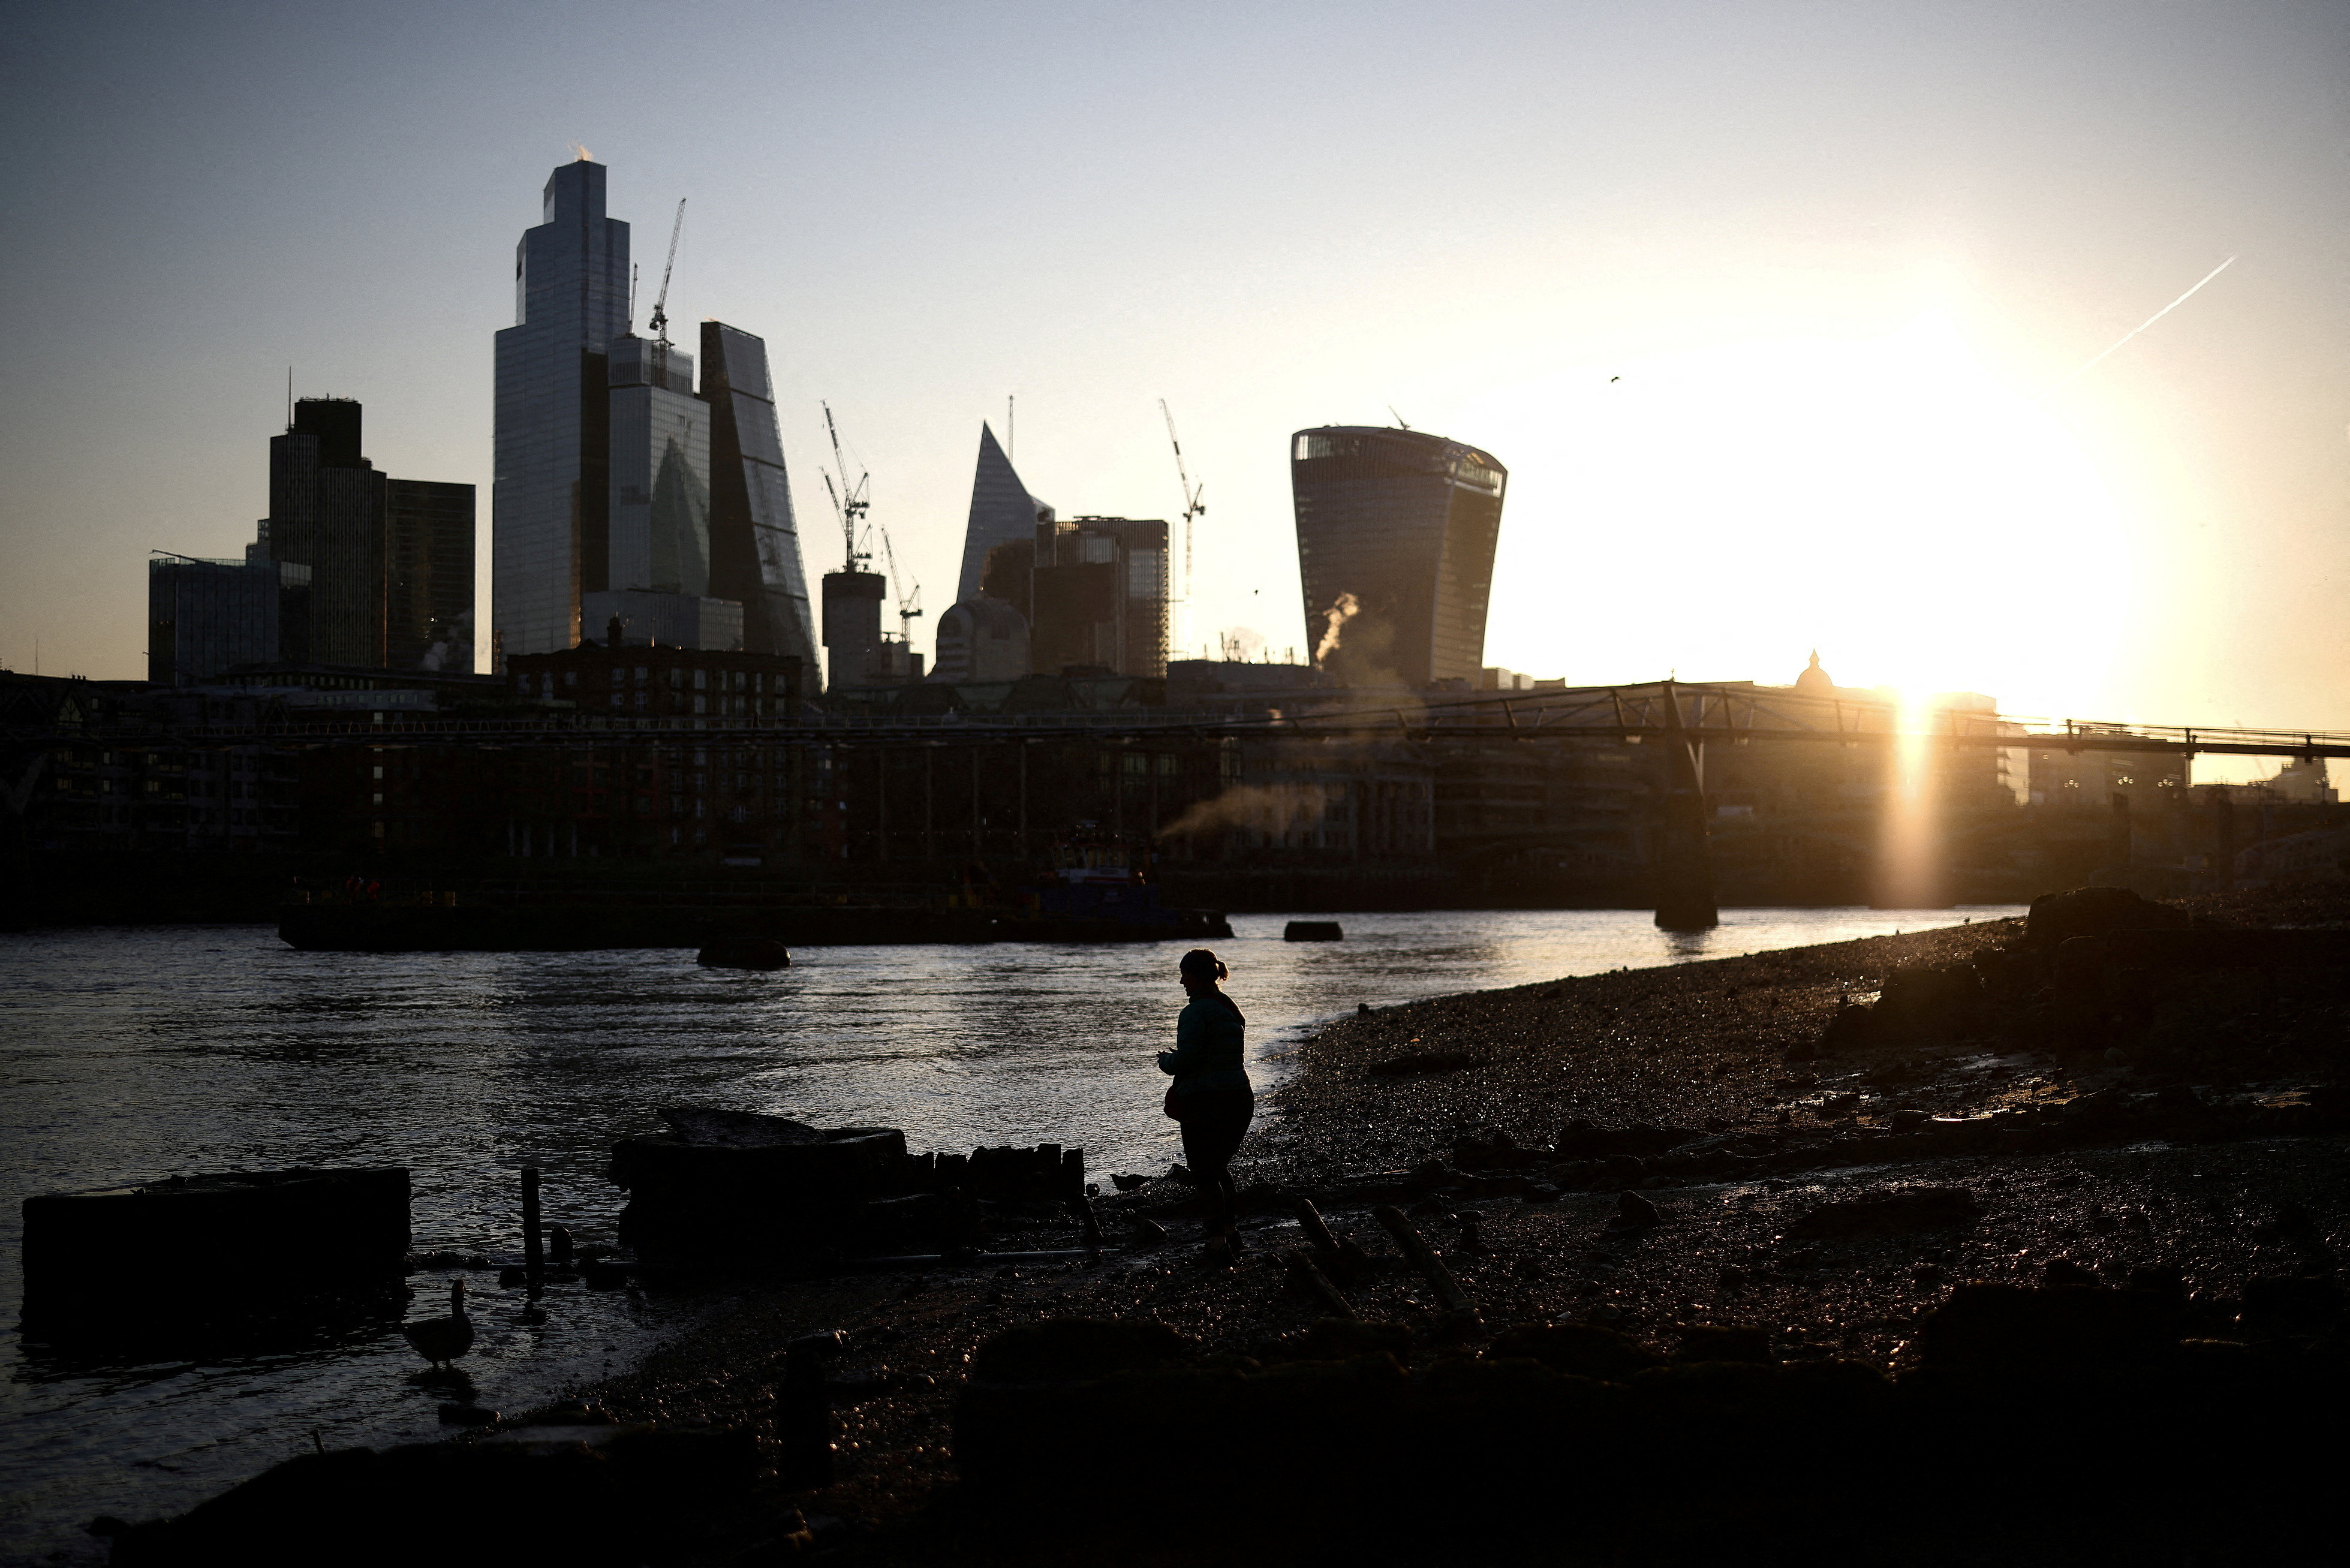 A person stands on the bank of the River Thames during sunrise in London